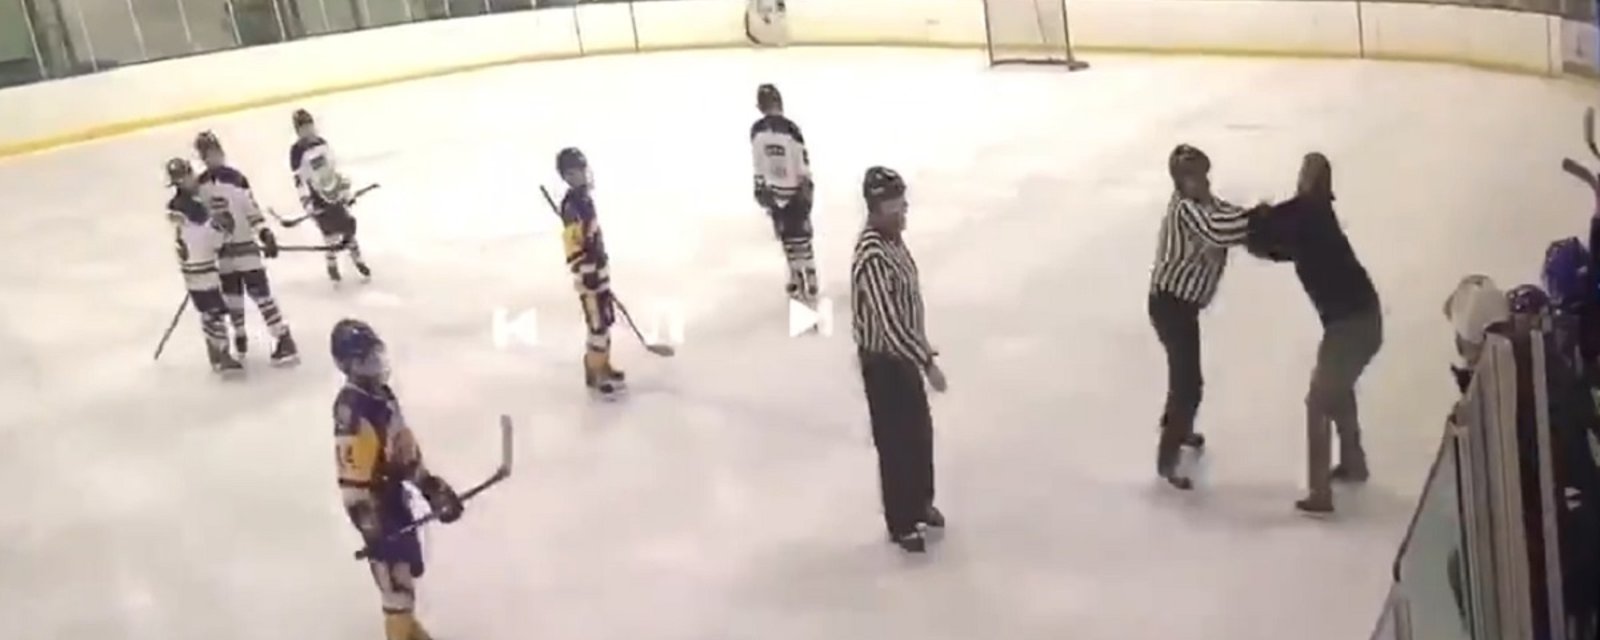 Crazed coach attacks referee at youth hockey game.